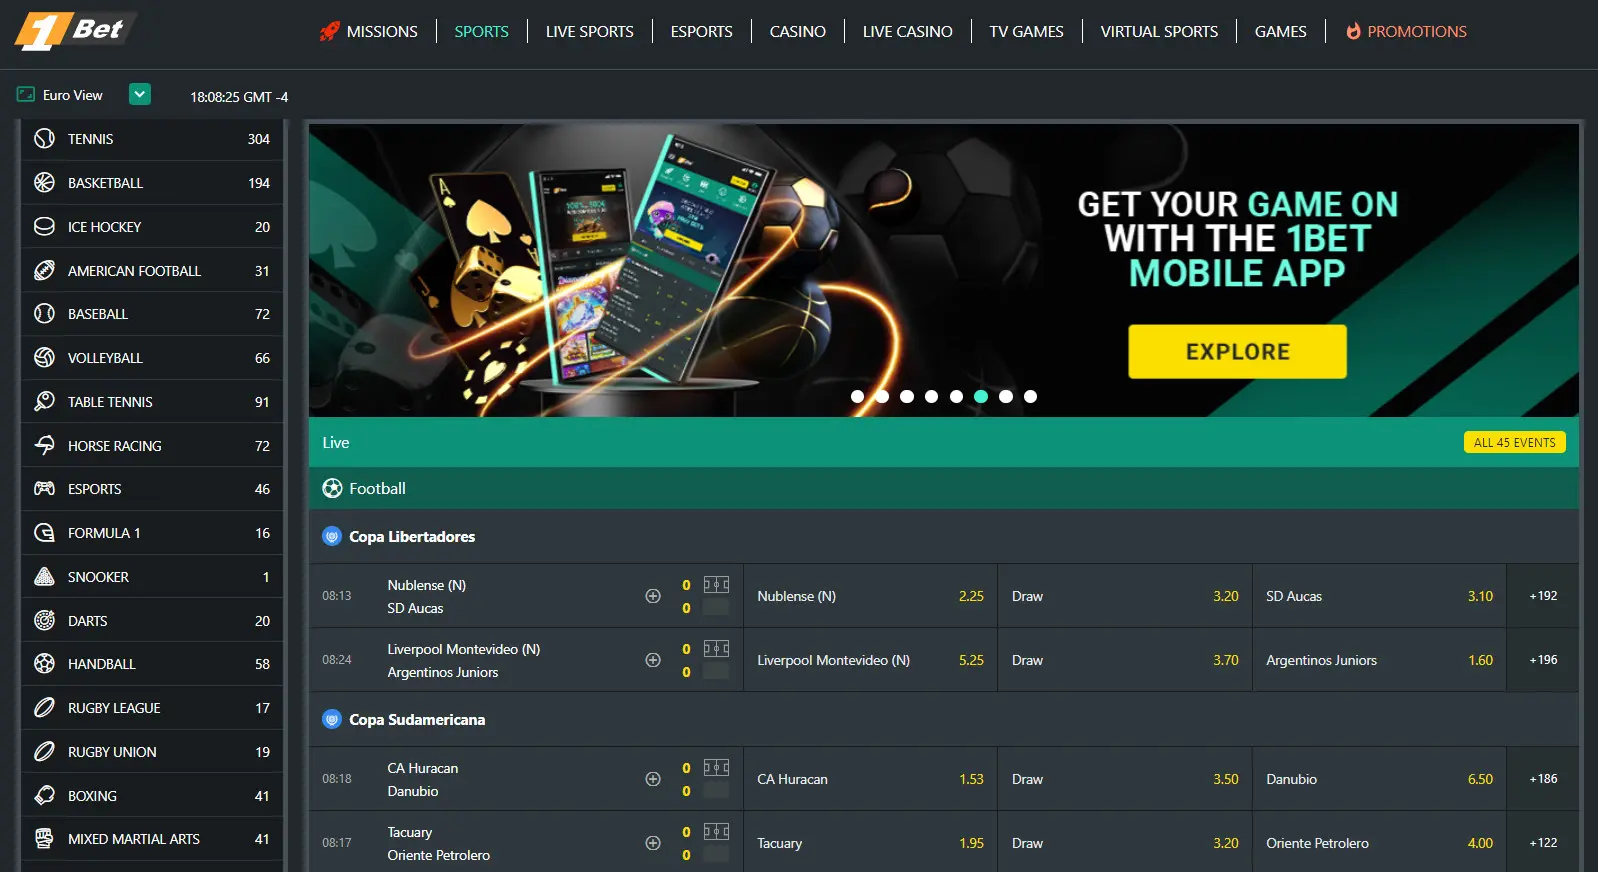 The Future Of asian bookies, asian bookmakers, online betting malaysia, asian betting sites, best asian bookmakers, asian sports bookmakers, sports betting malaysia, online sports betting malaysia, singapore online sportsbook